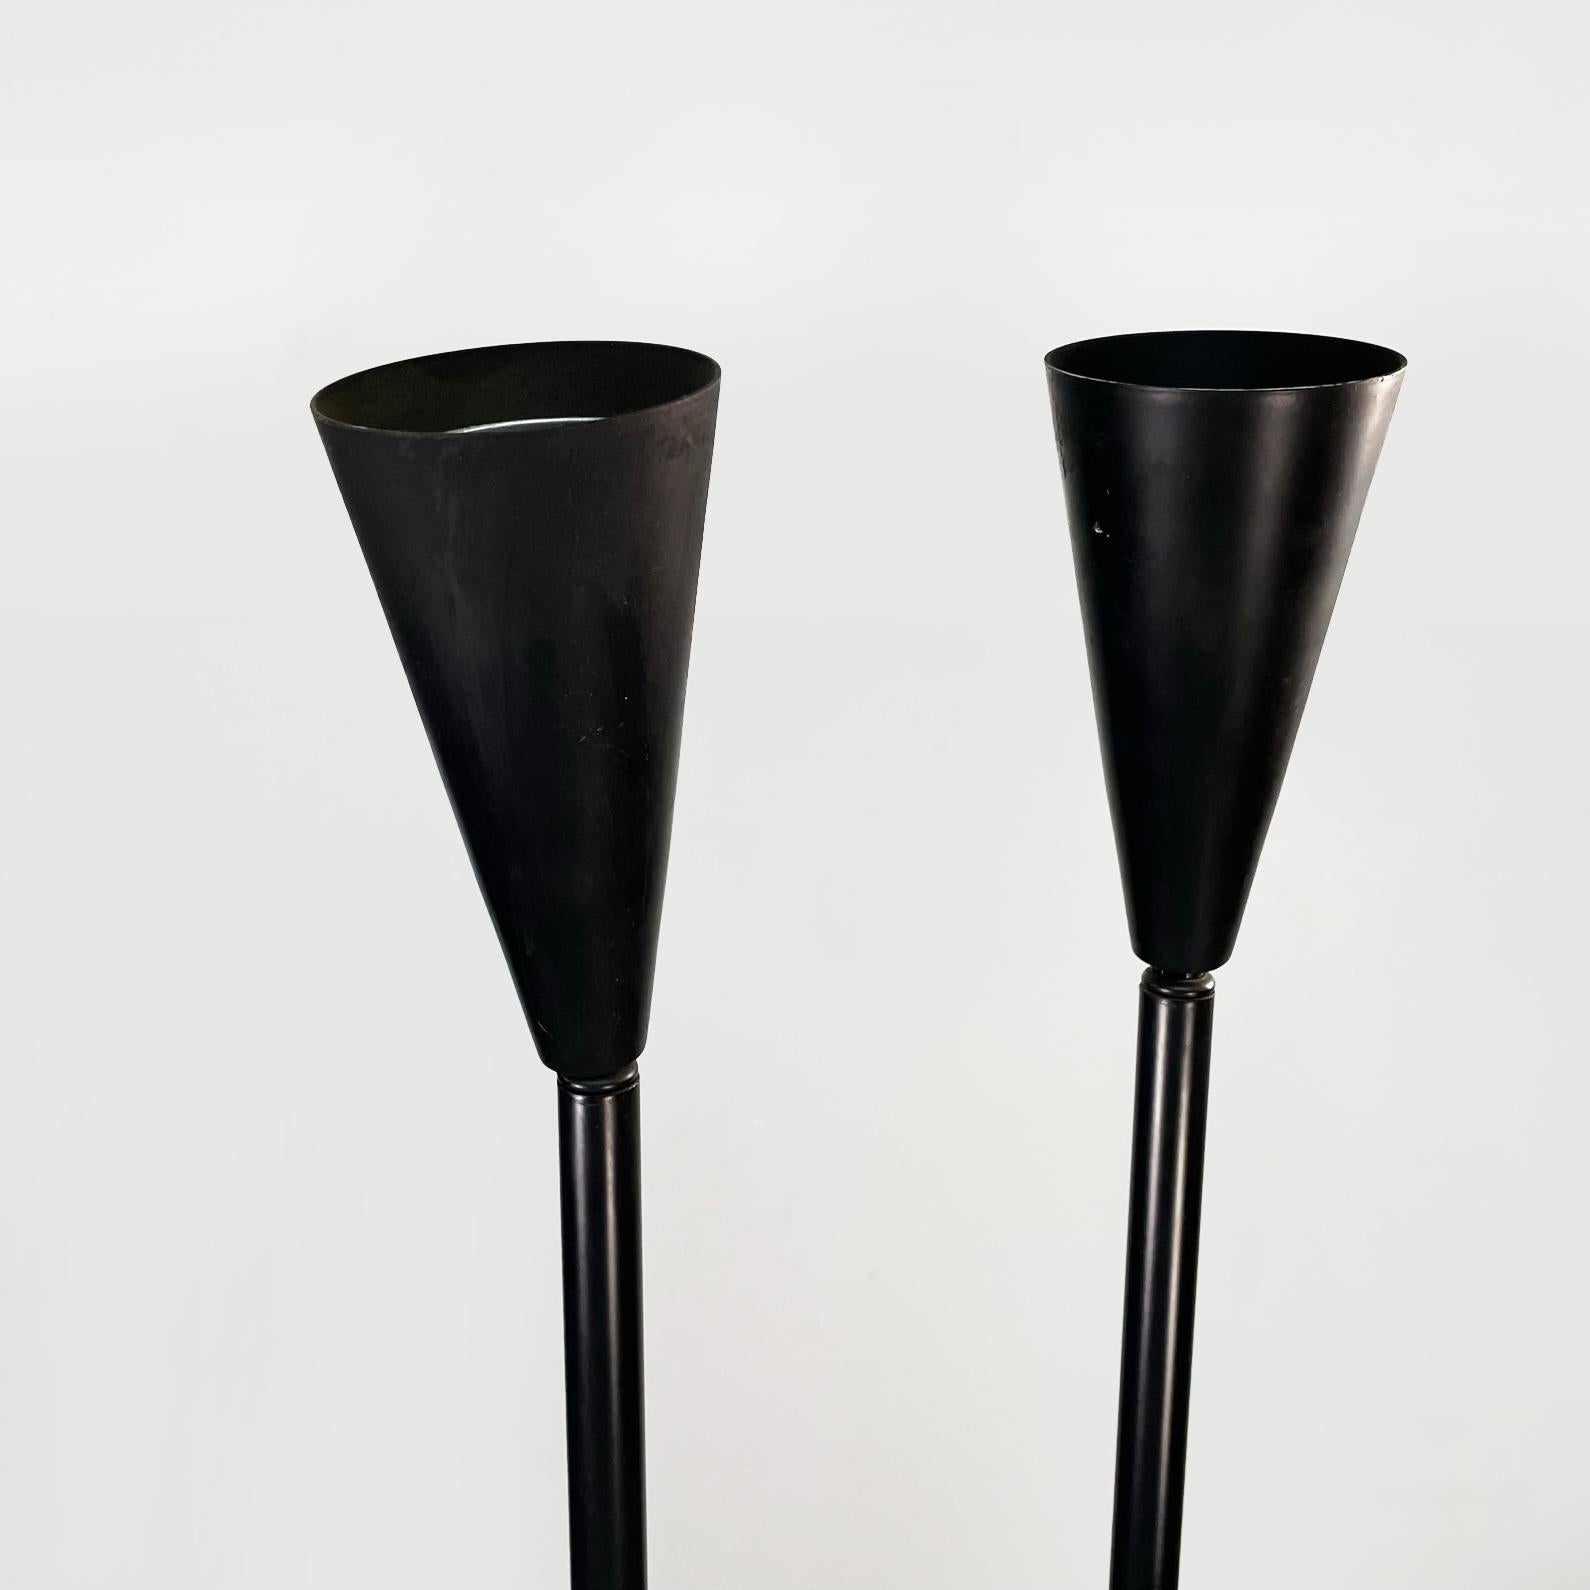 Italian Modern Floor Lamp Whit Two Light Adjustable in Black Metal, 1990s In Good Condition For Sale In MIlano, IT